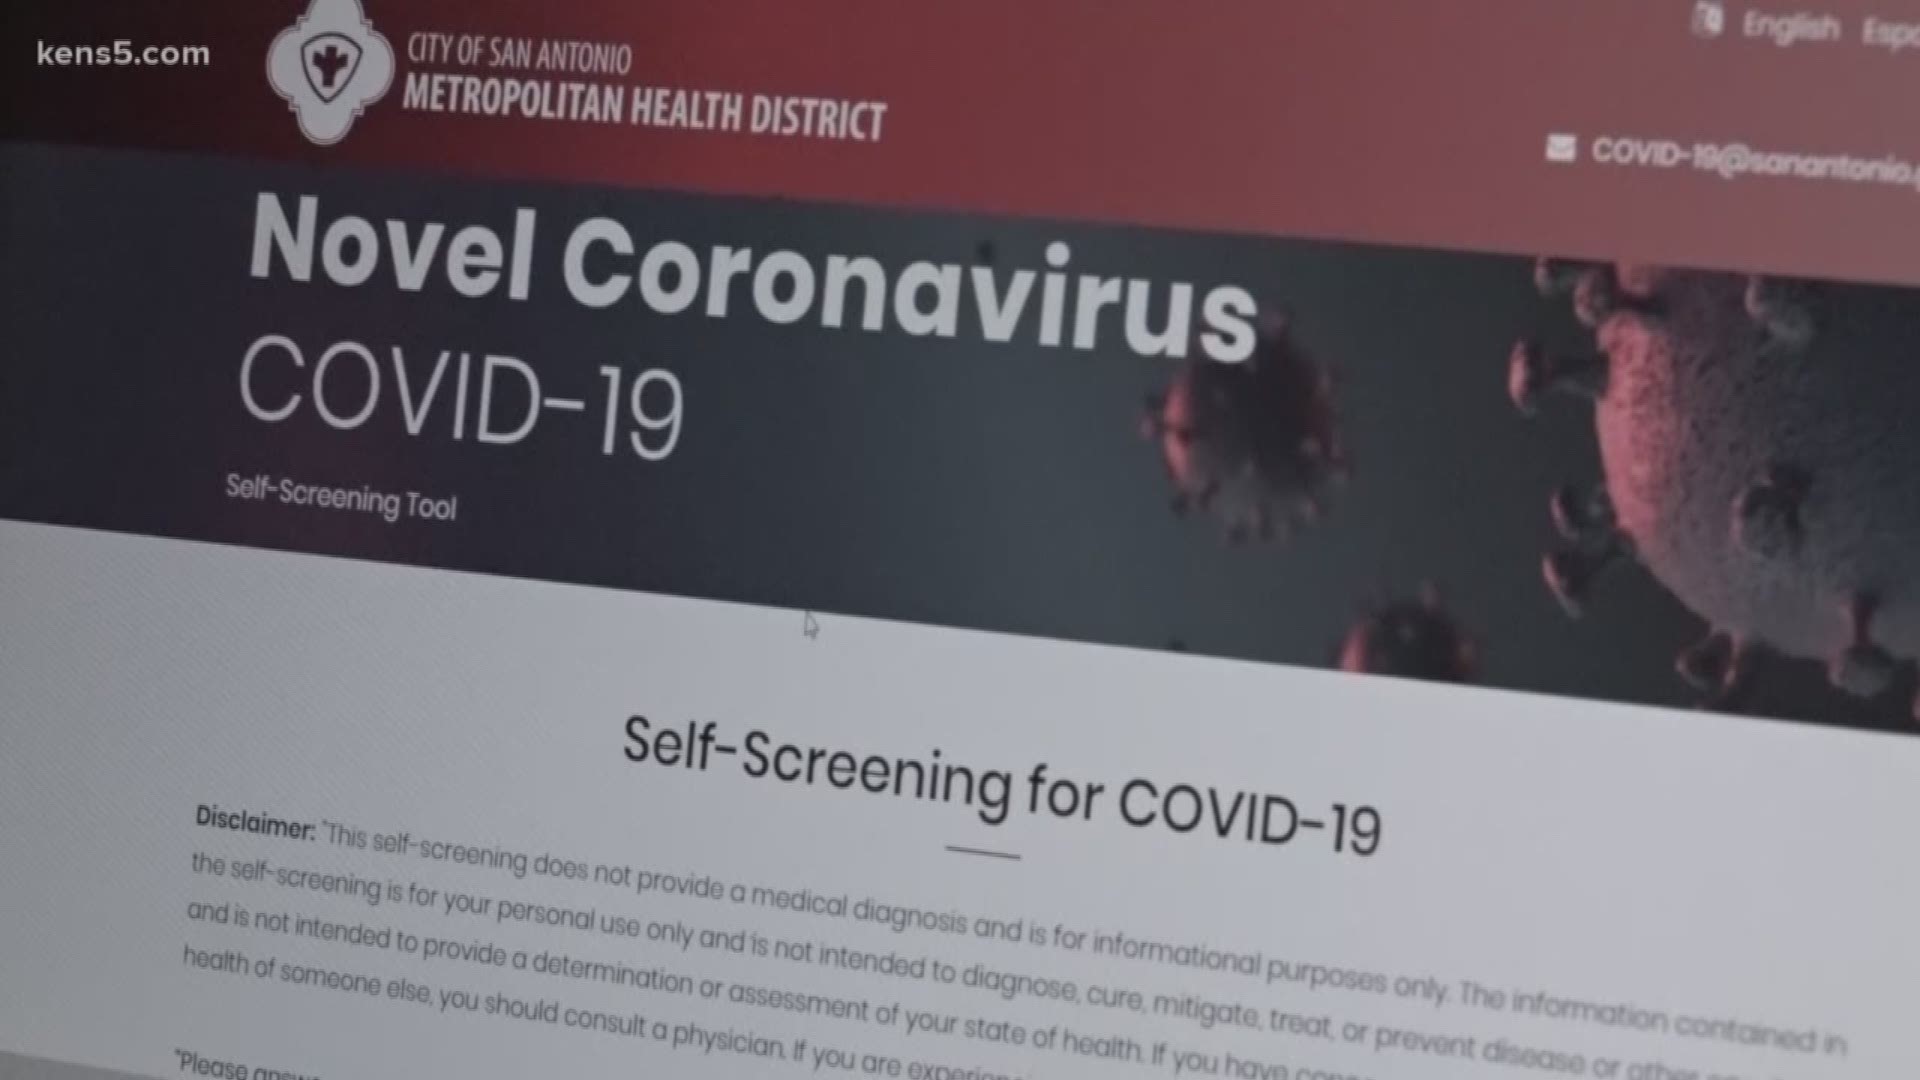 The City of San Antonio has set up a free screening questionnaire online that will let a person know if need to be tested or not.